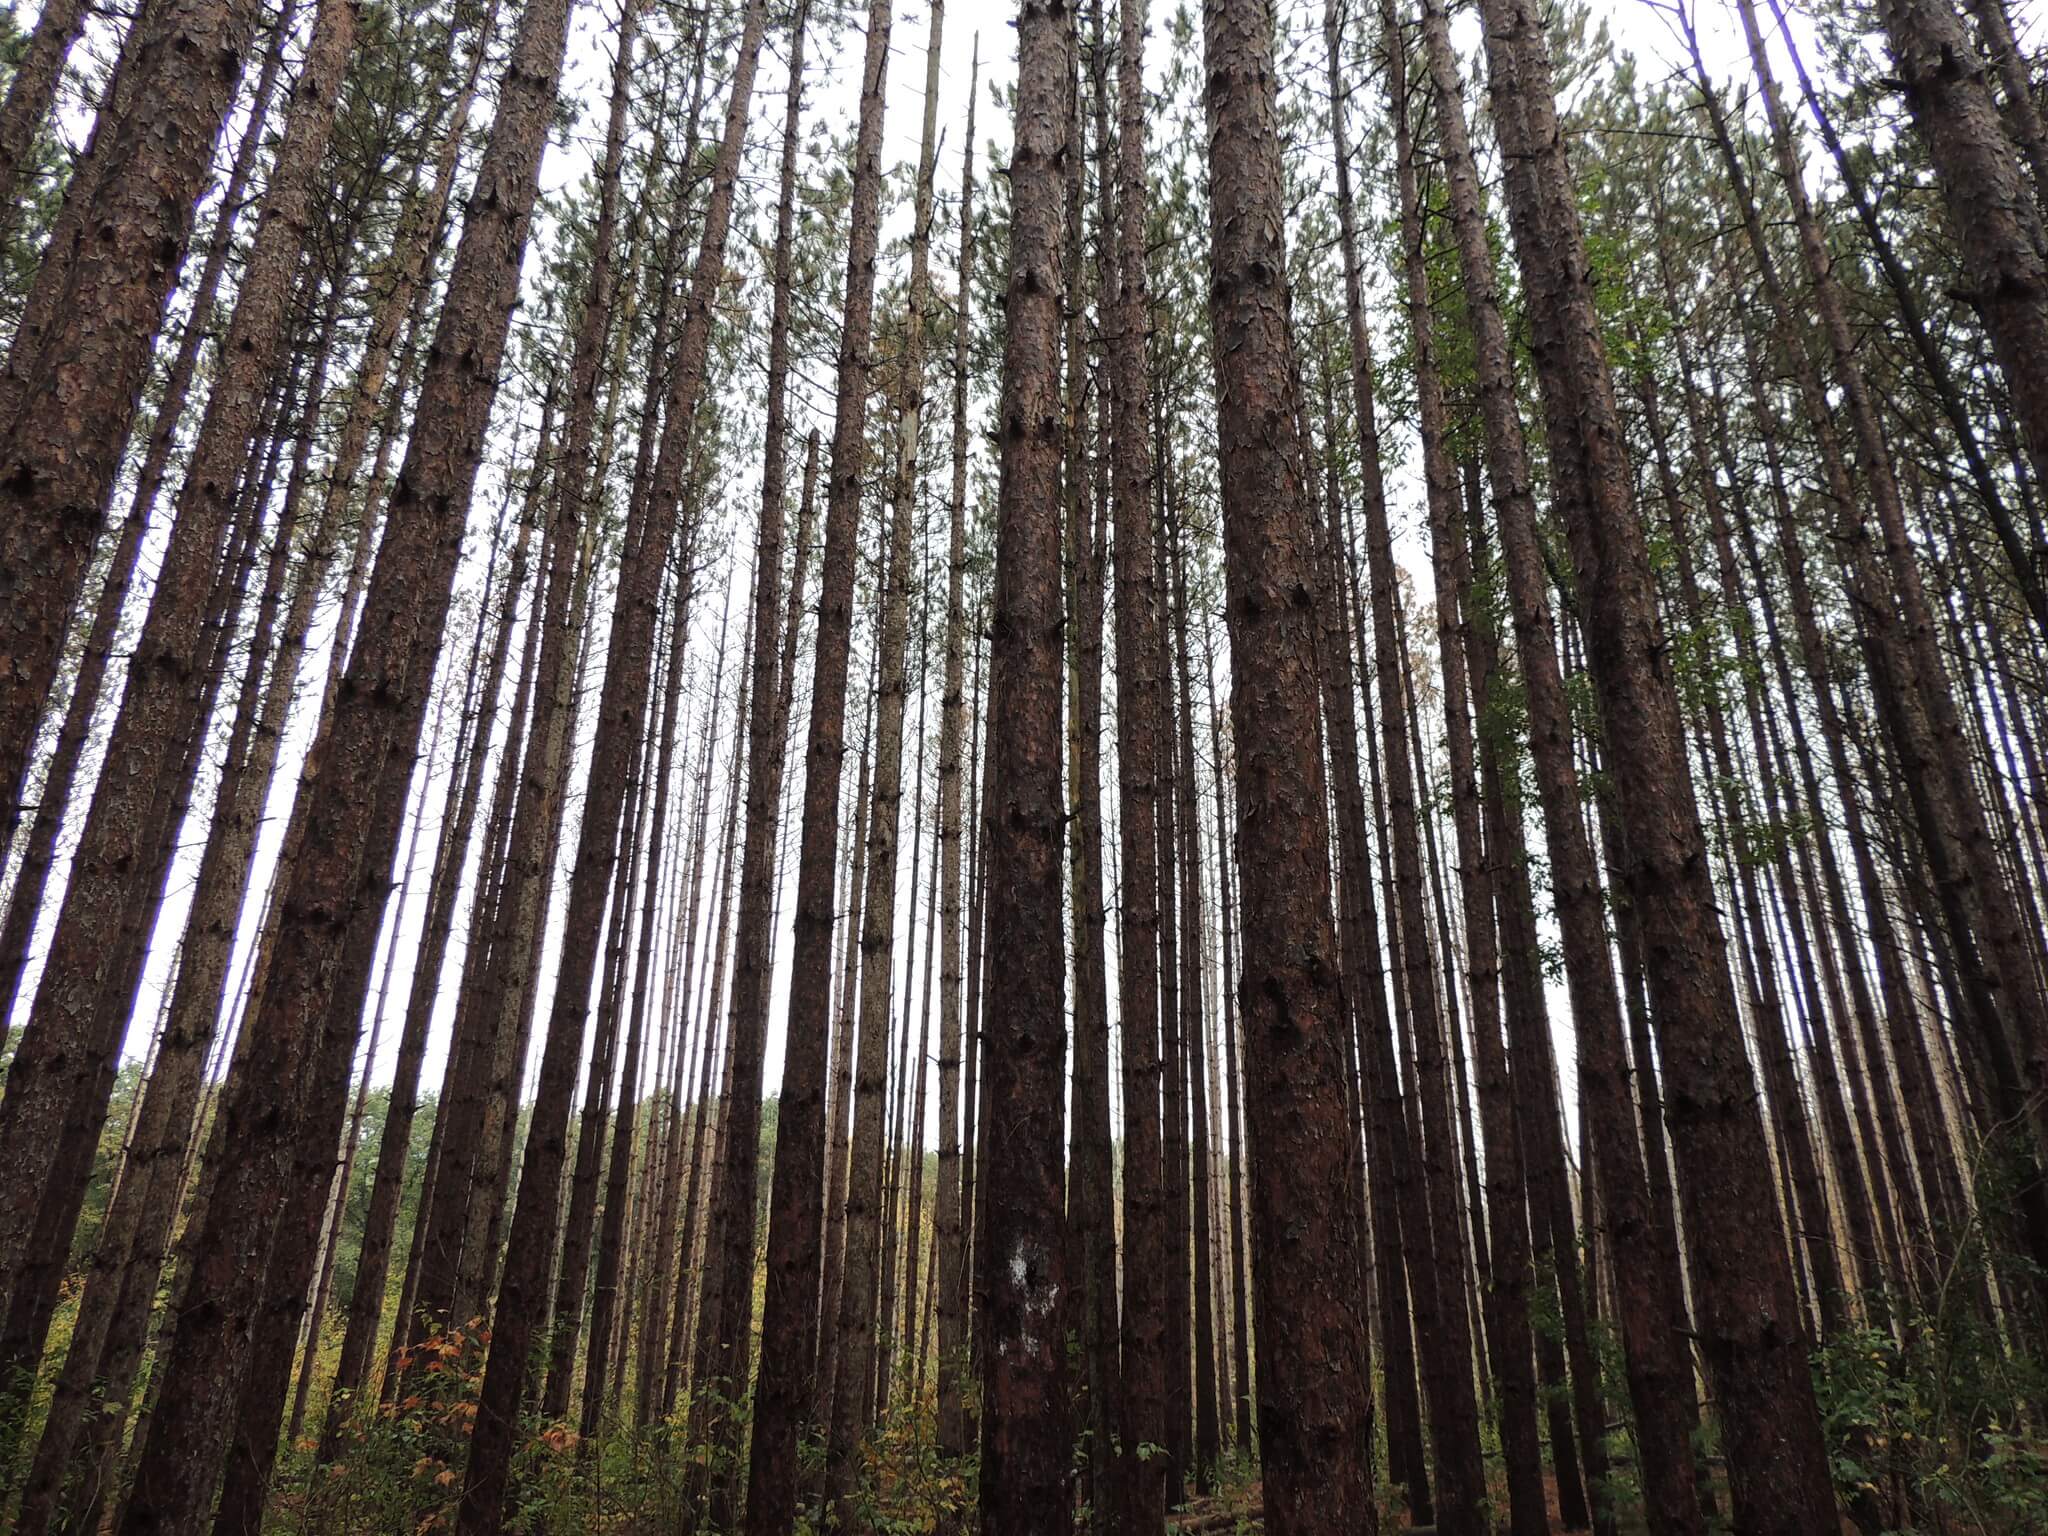 A group of closely packed tall skinny trees.